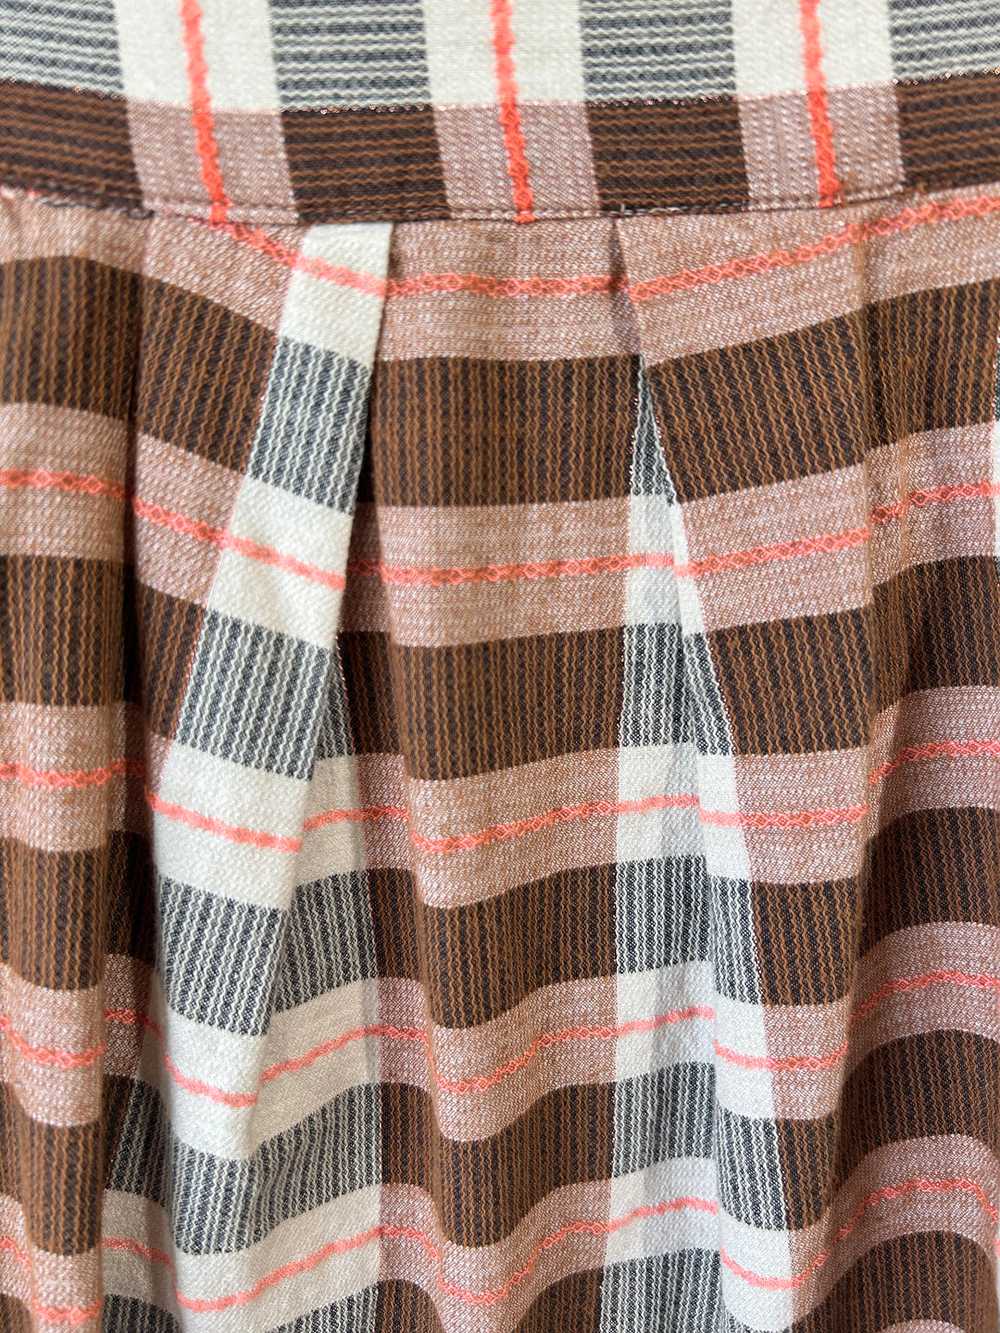 Ace & Jig Pink & Brown Striped Skirt - image 2